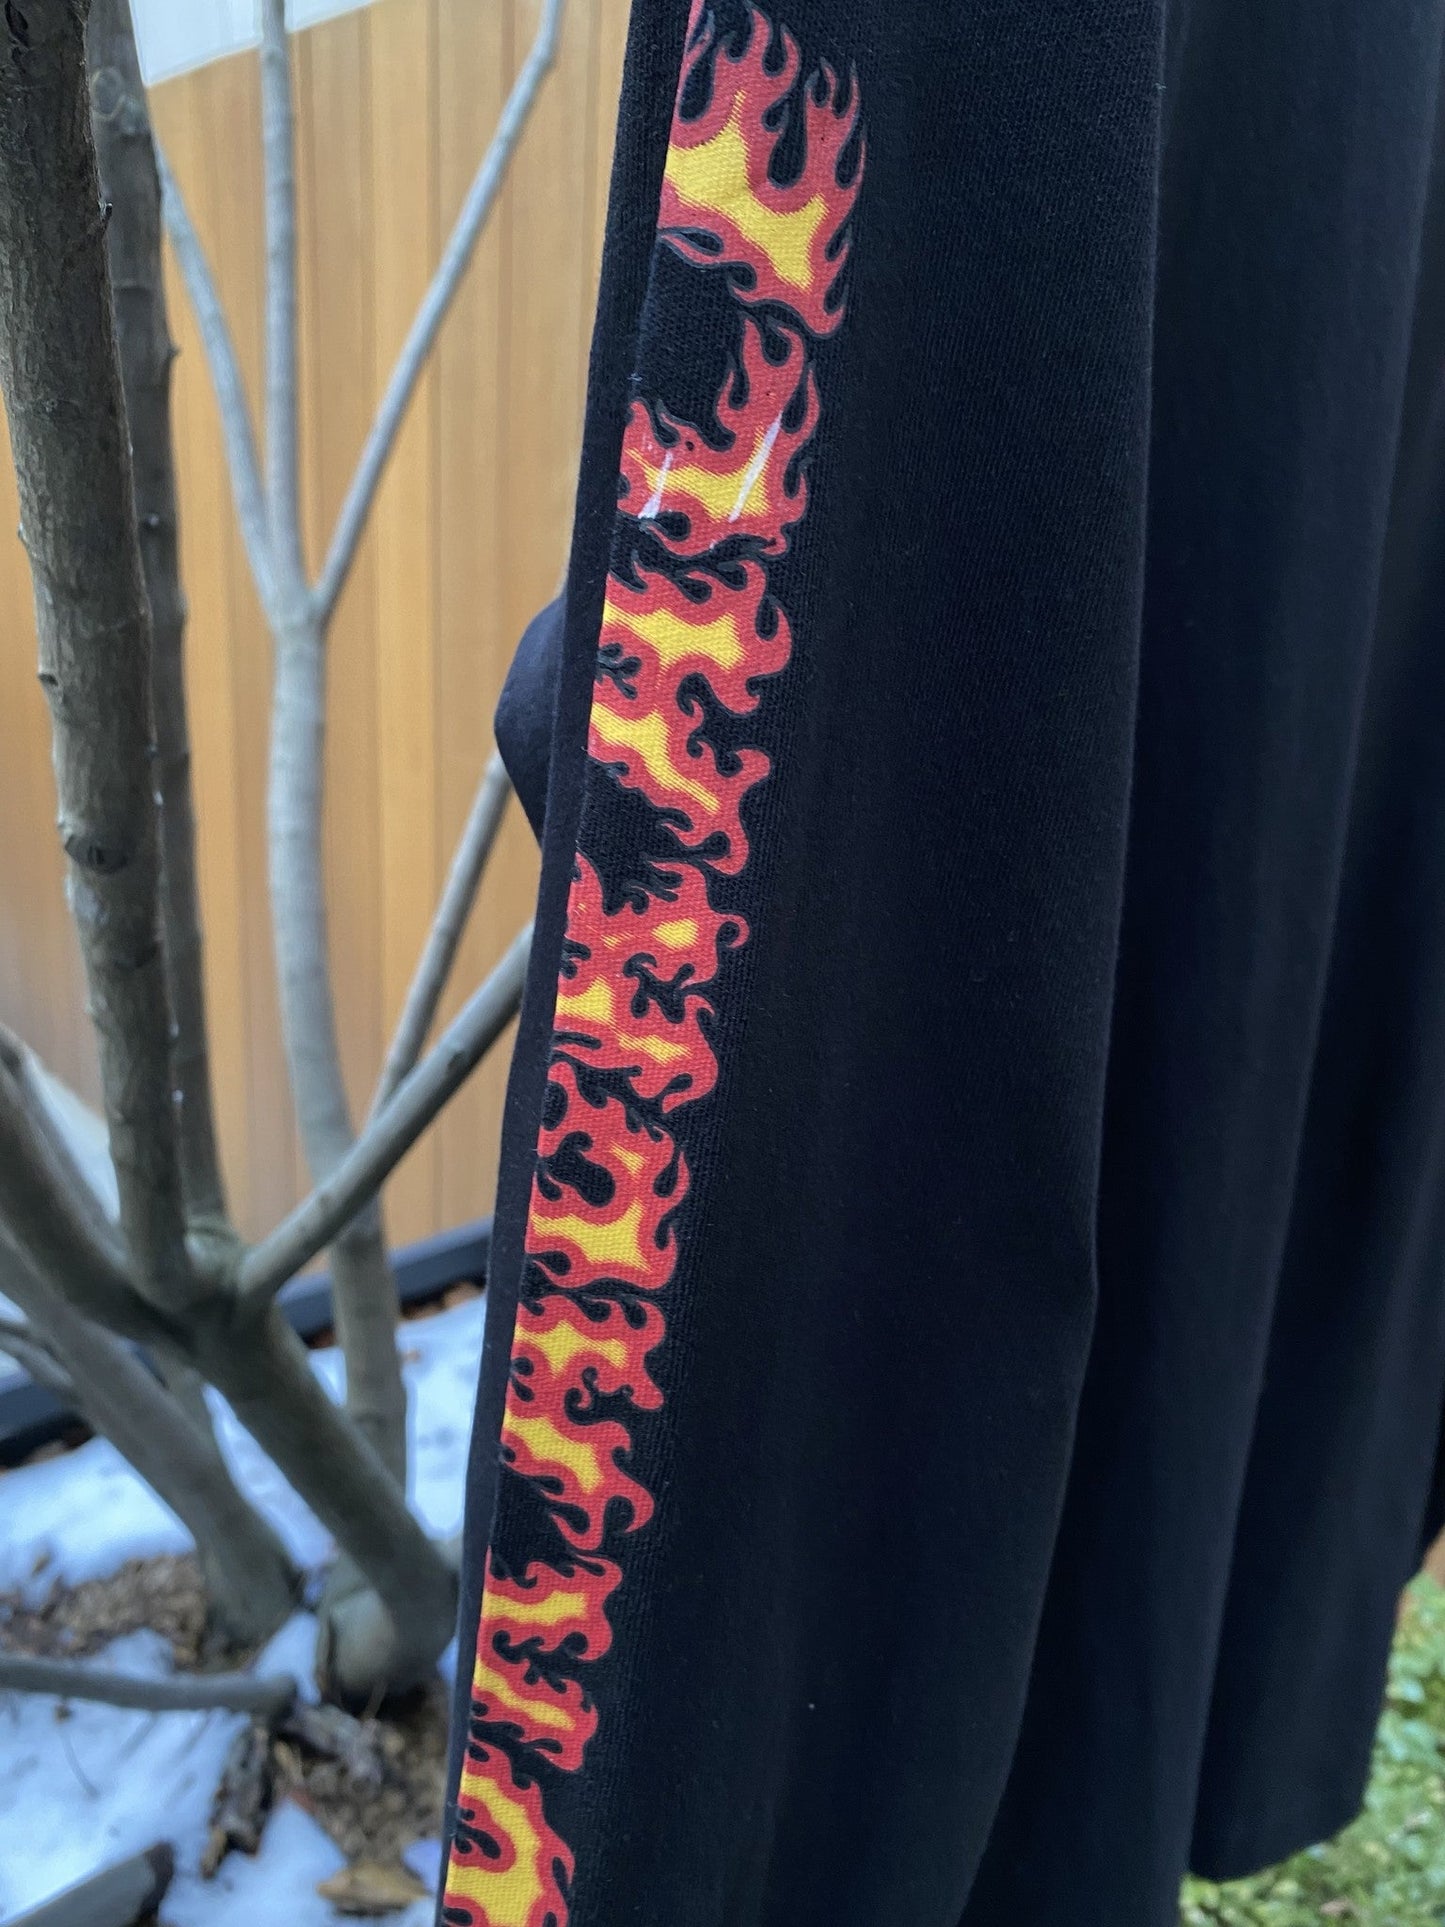 A DIESEL T-JUST-LS-C3 BLACK with flames on it from DIESEL.